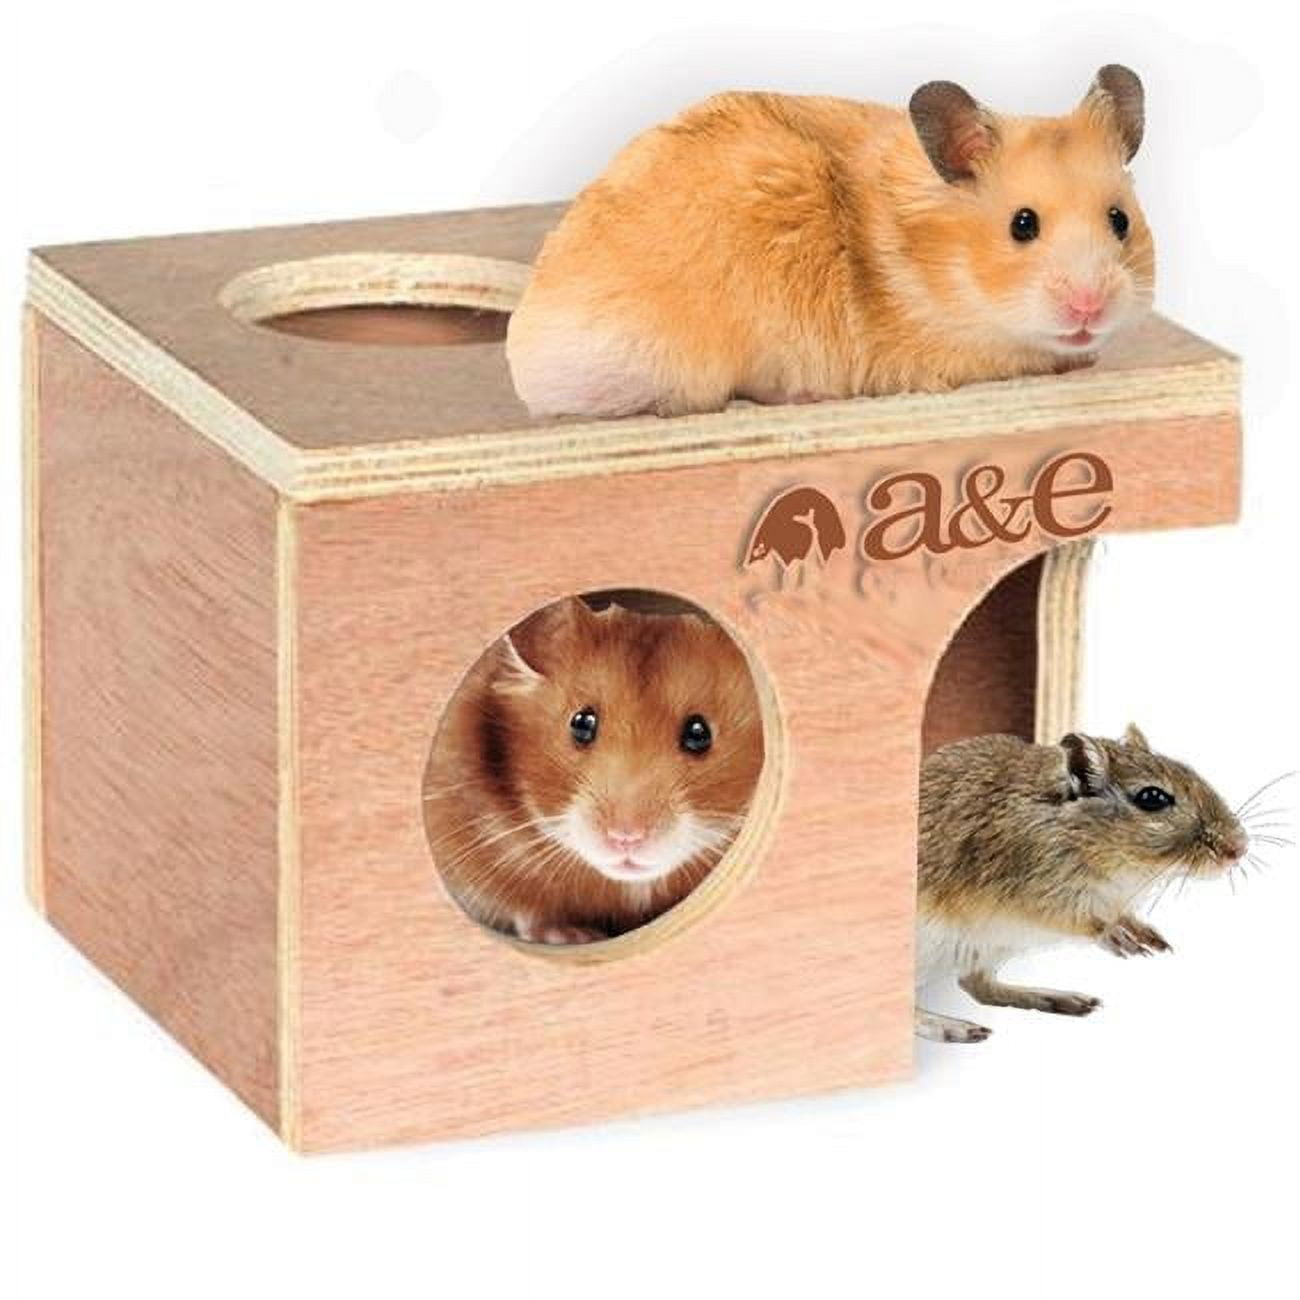 Picture of A&E Cage NB002 6.25 x 5.12 x 4.5 in. Hamster & Gerbil Hut - Medium